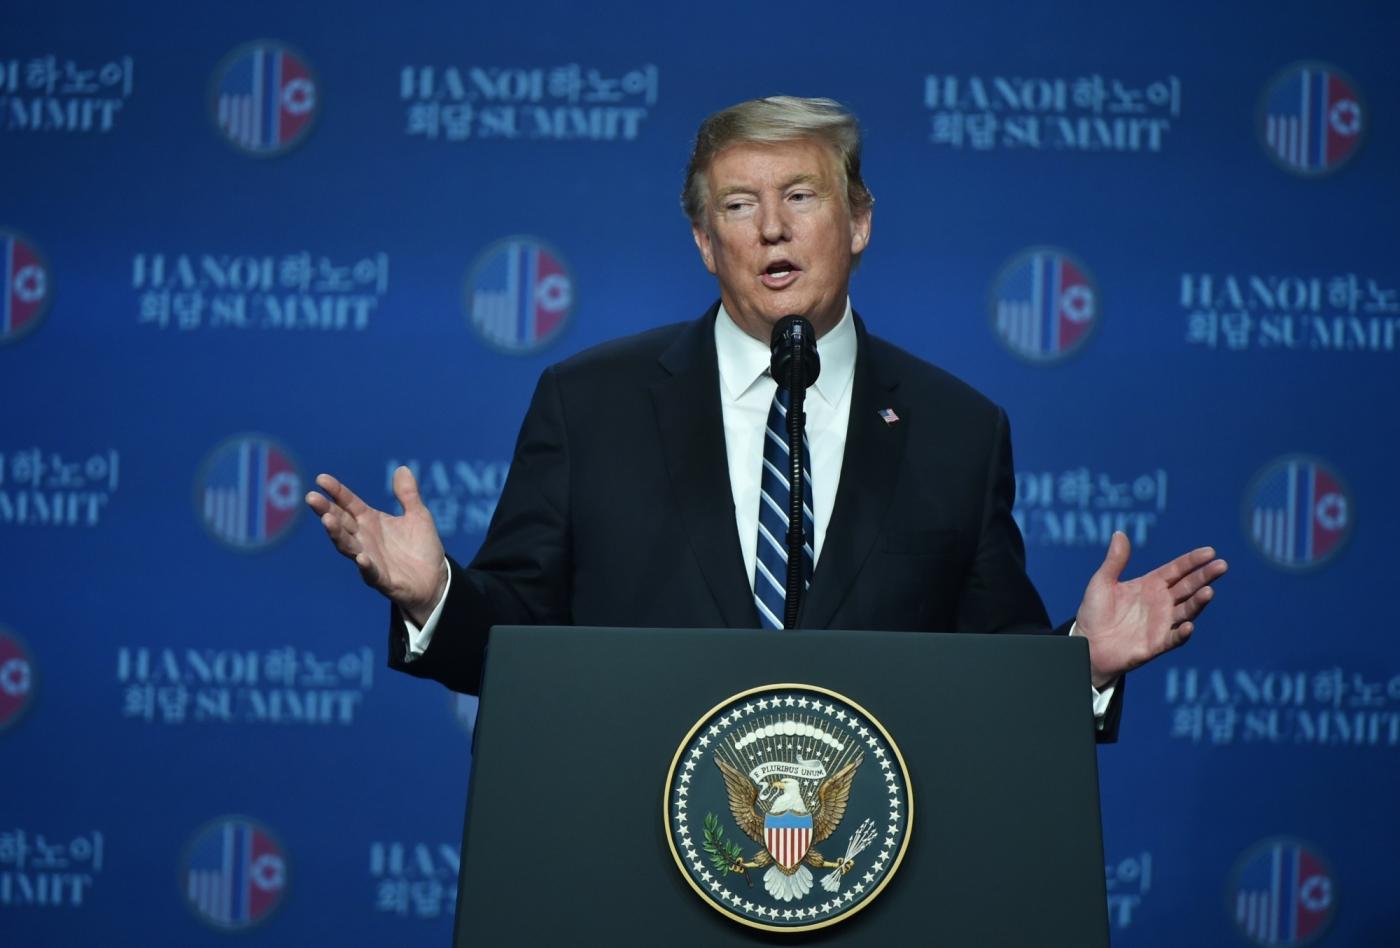 HANOI, Feb. 28, 2019 (Xinhua) -- U.S. President Donald Trump speaks at a press conference in Hanoi, Vietnam, Feb. 28, 2019. A gap remained between what the Democratic People's Republic of Korea (DPRK) wanted and what the U.S. wanted, Donald Trump told the press conference, explaining the earlier-than-scheduled end to his second summit with DPRK top leader Kim Jong Un. (Xinhua/Wang Shen/IANS) by .